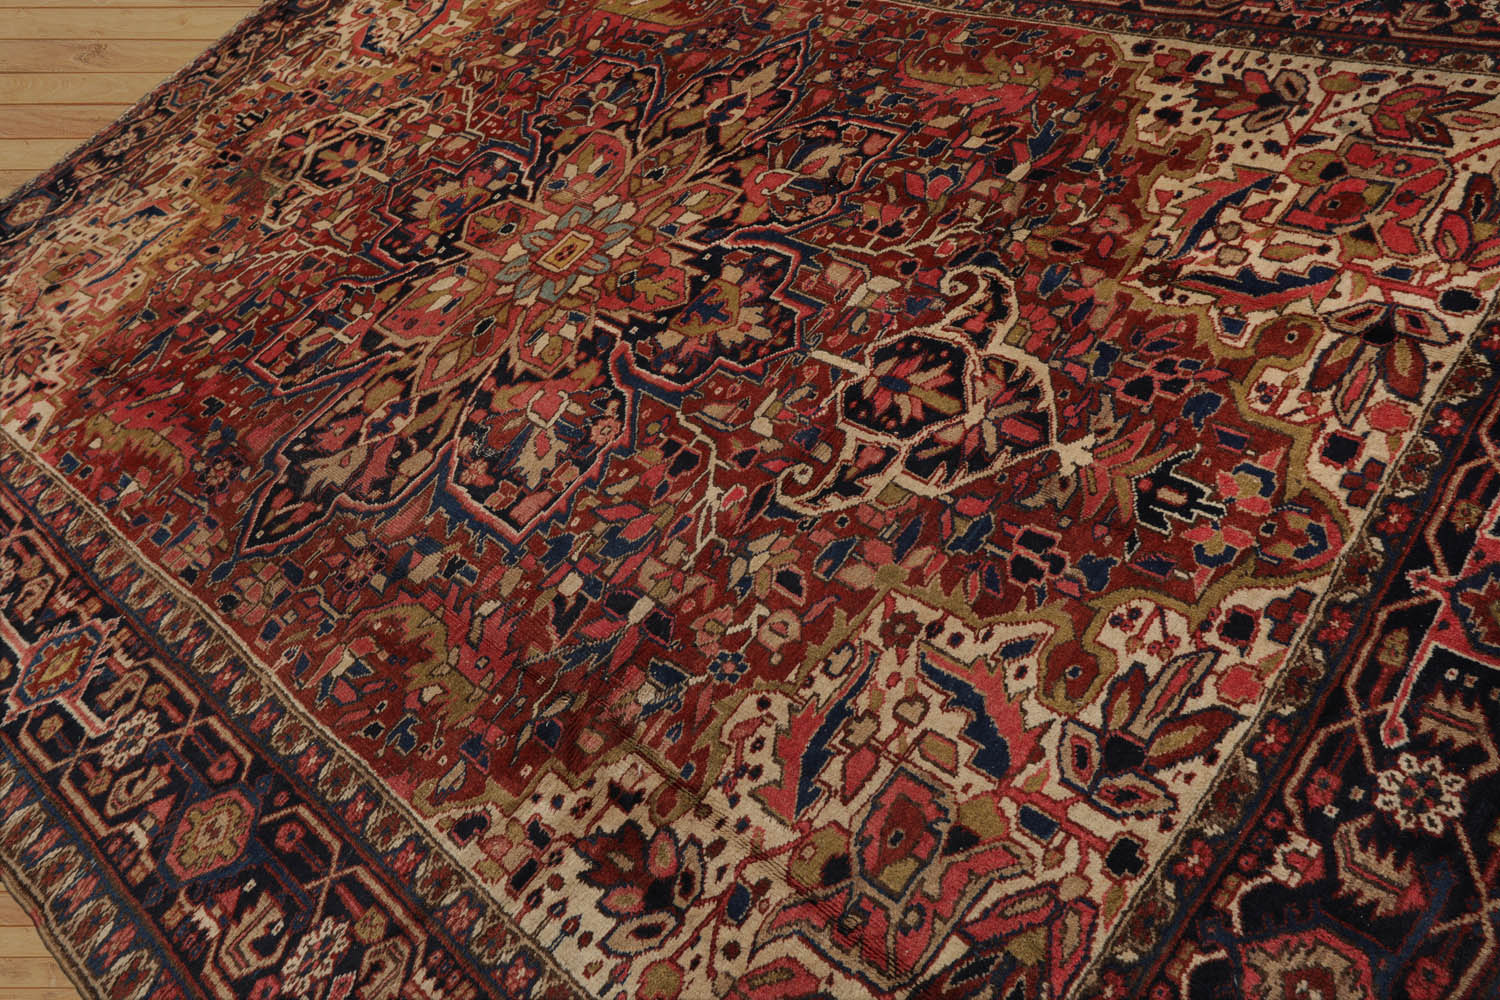 Barahona 8x10 Hand Knotted 100% Wool Heriz Traditional Oriental Area Rug Rust, Midnight Blue Color